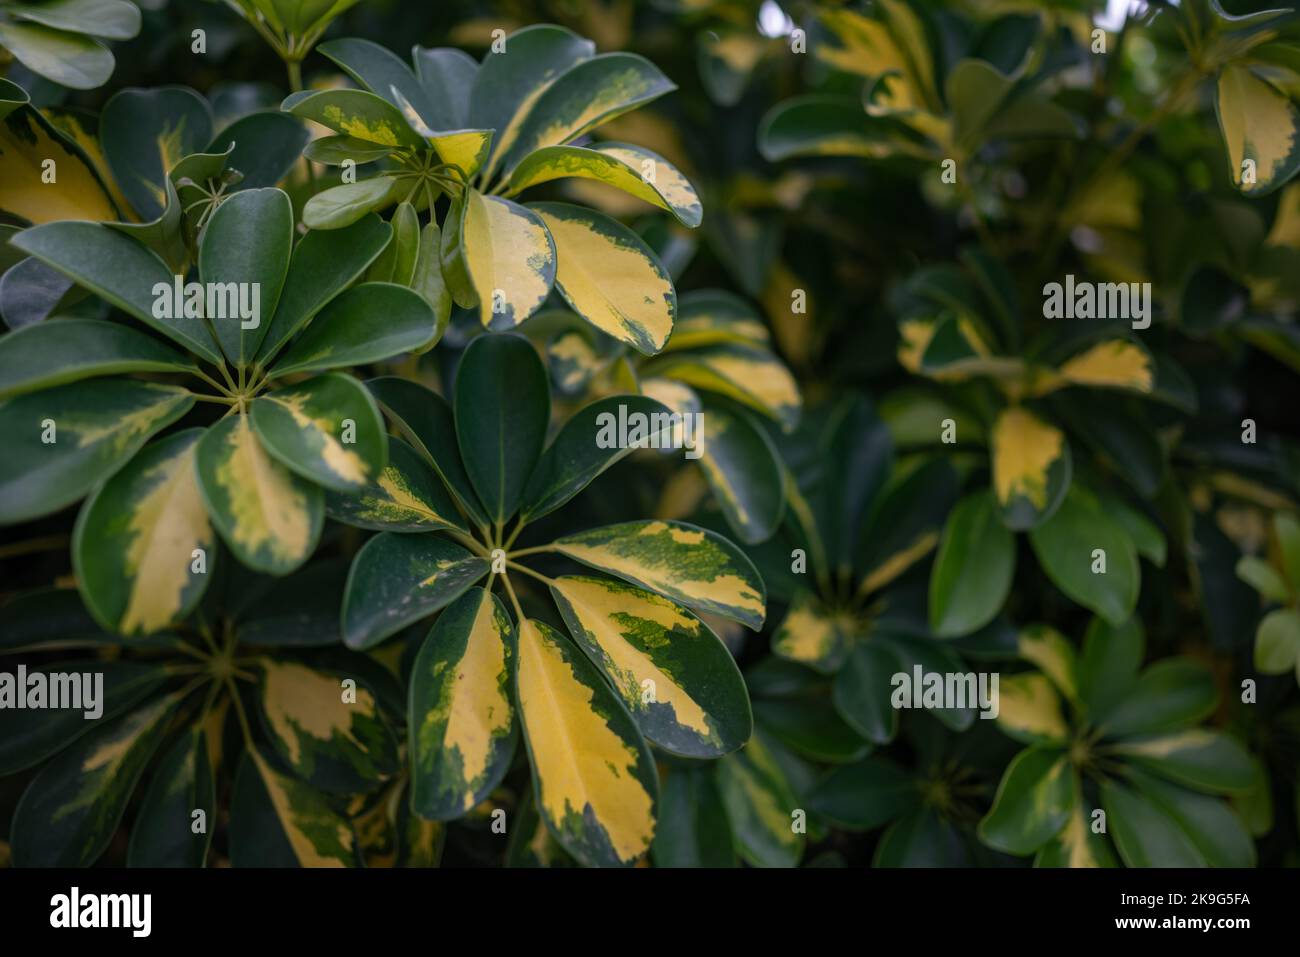 Schefflera background. Variagated leaves with yellow pattern Stock Photo